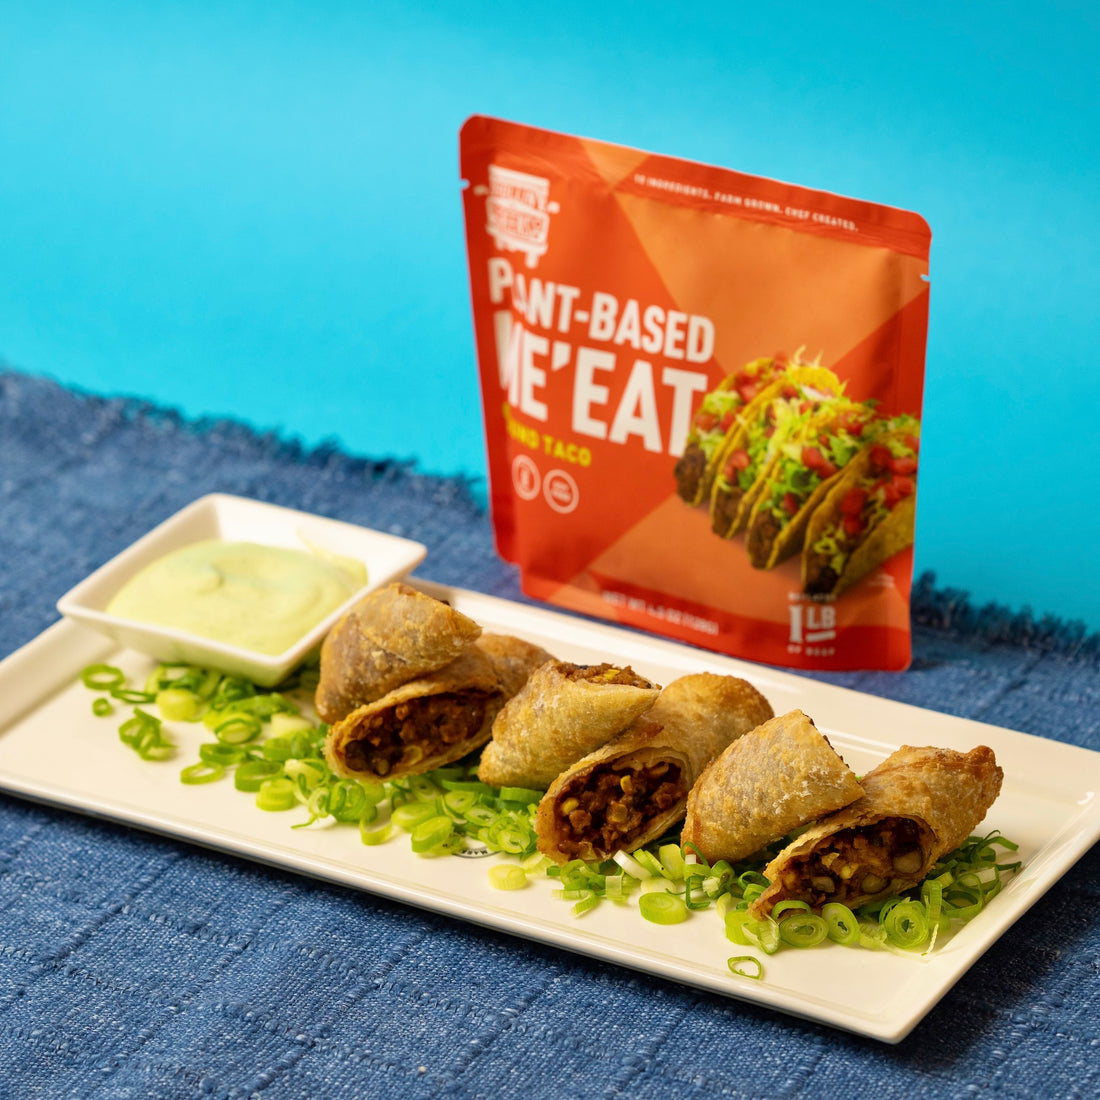 Southwest ME'EAT Egg rolls with an Avocado Ranch Dip